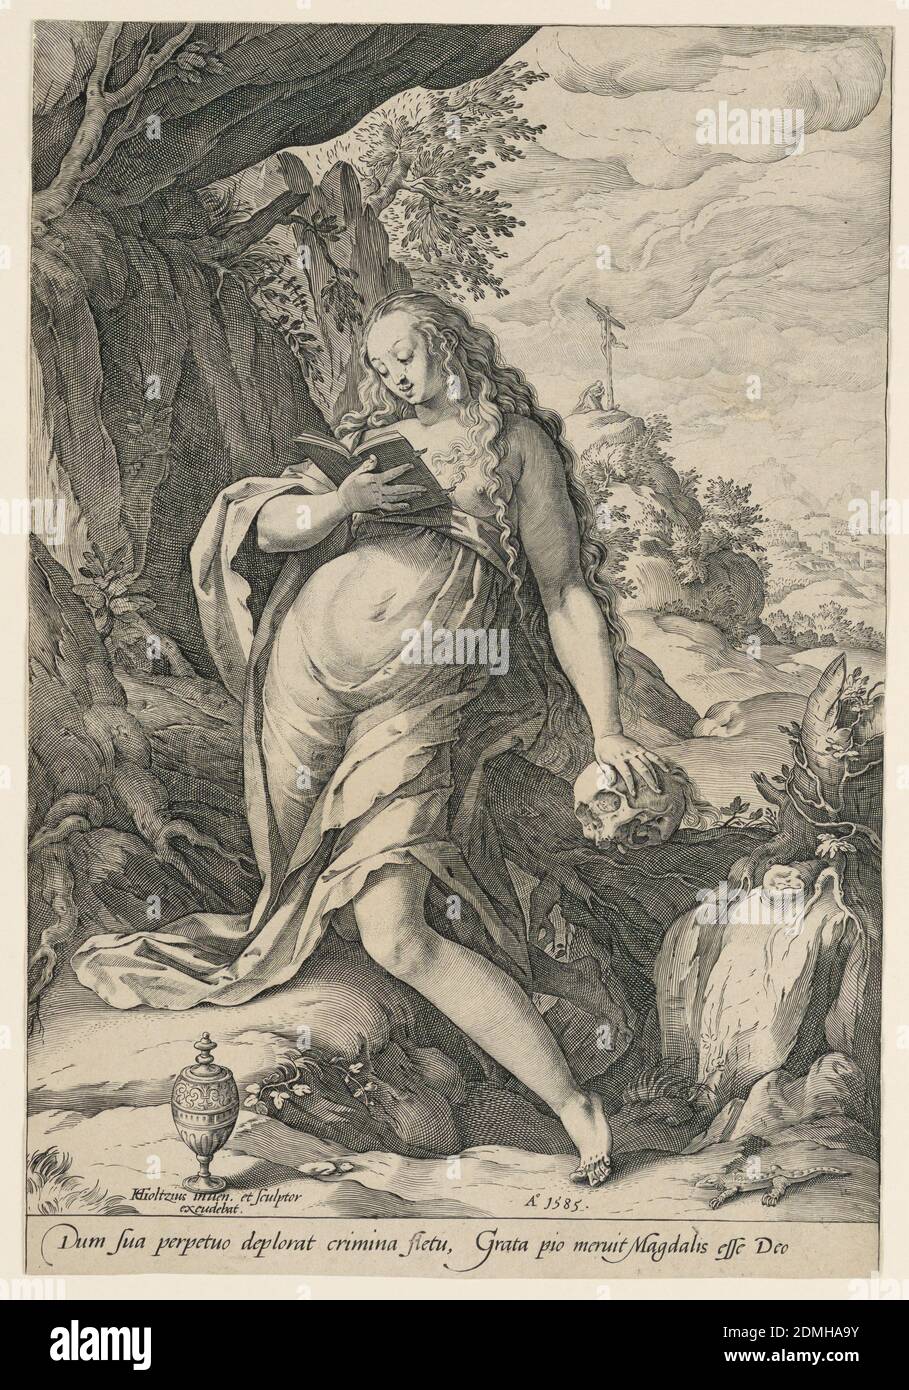 St. Mary Magdalene Penitent, Hendrik Goltzius, Netherlandish, 1558 – 1617, Engraving on laid paper, Standing figure of Mary Magdalen in frontal view. Her head is turned to left, lookking down. She holds a book in her right hand; her left hand rests upon a skull on a rock. In background, hills, houses, and a crucifix. Inscribed, lower left: H. Goltzius inuen. et sculptor exeubat'; center: 'A 1585'; across lower margin: 'Dum su a perpetua deplorat crimina fieta, grata pio, neruit Magdalis este deo'. Cut within platemark., Netherlands, 1585, Print Stock Photo